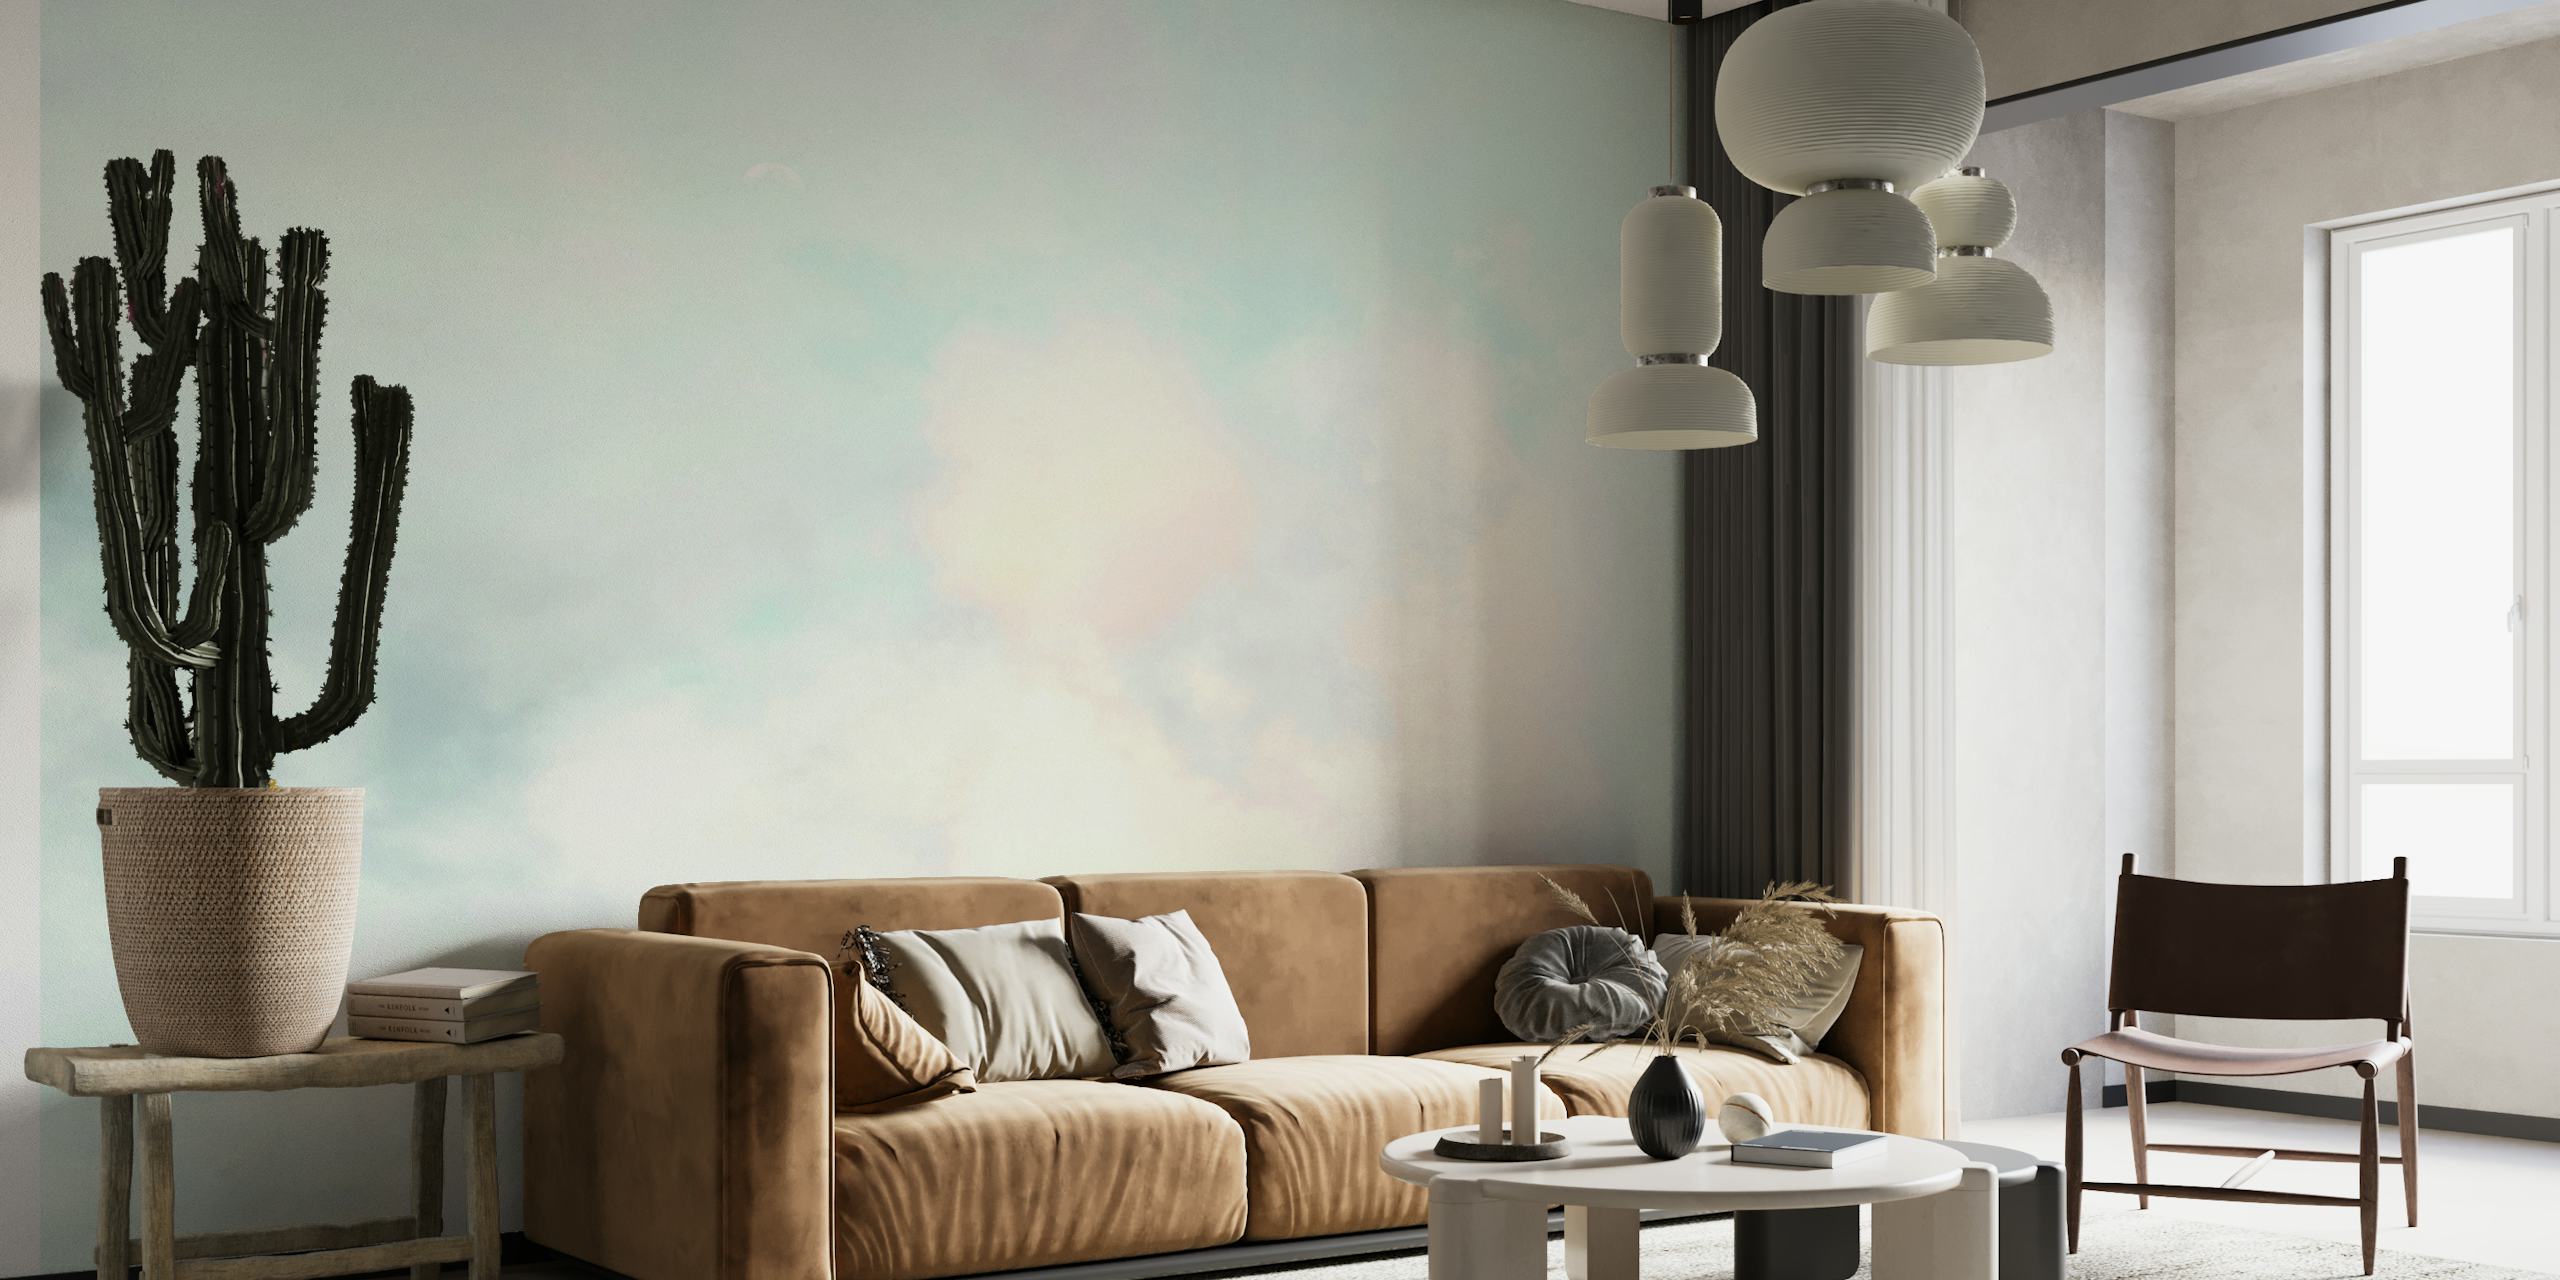 Soft pastel clouds wall mural for a serene home atmosphere